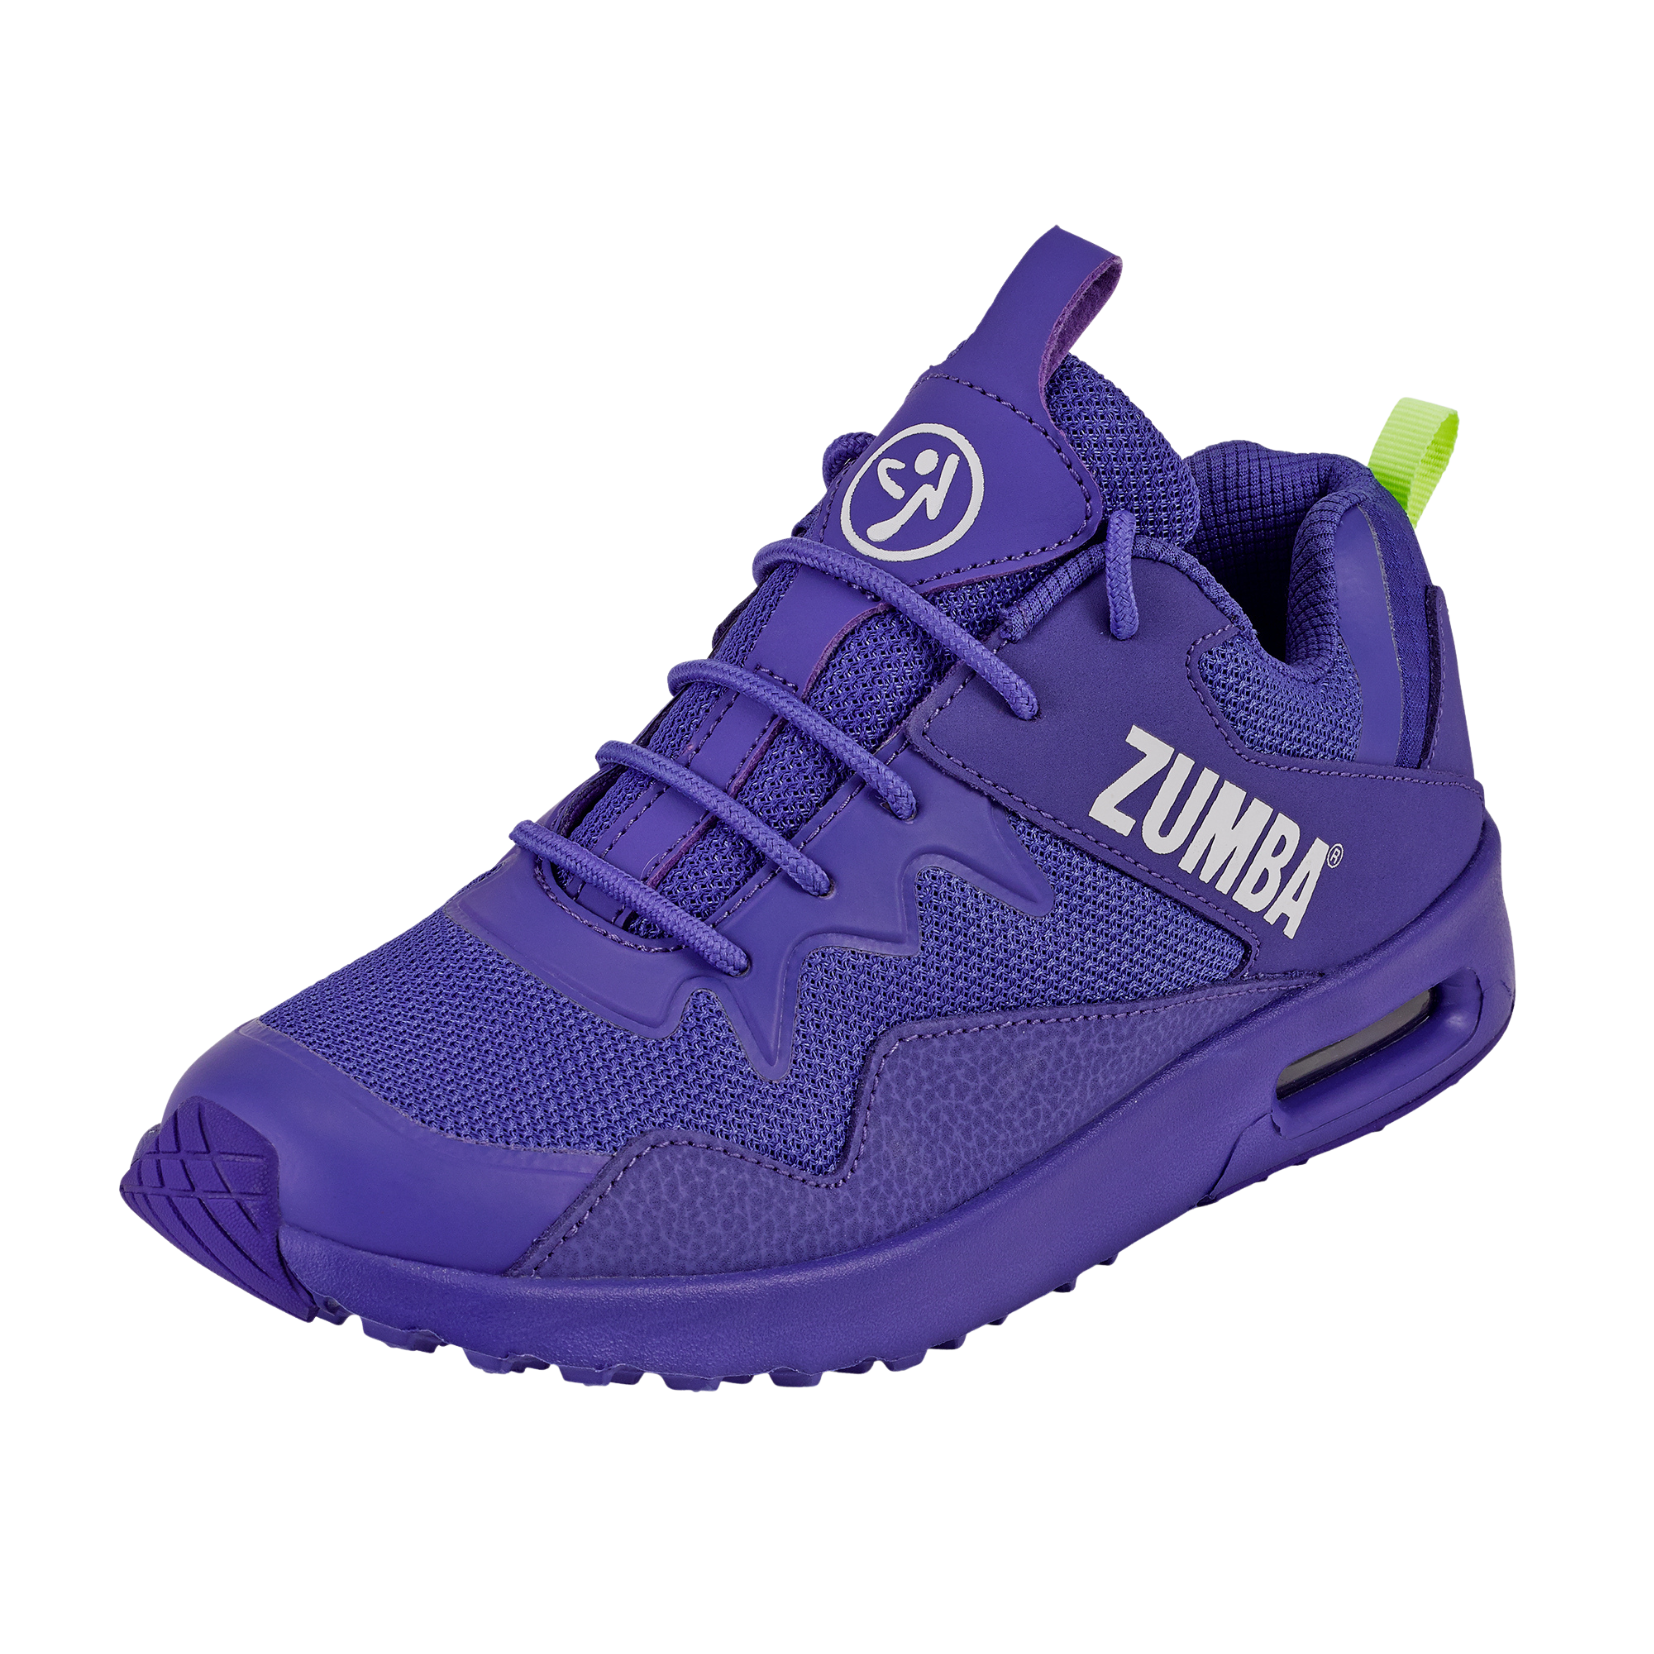 Zumba Air Classic - Purple (Special Order)